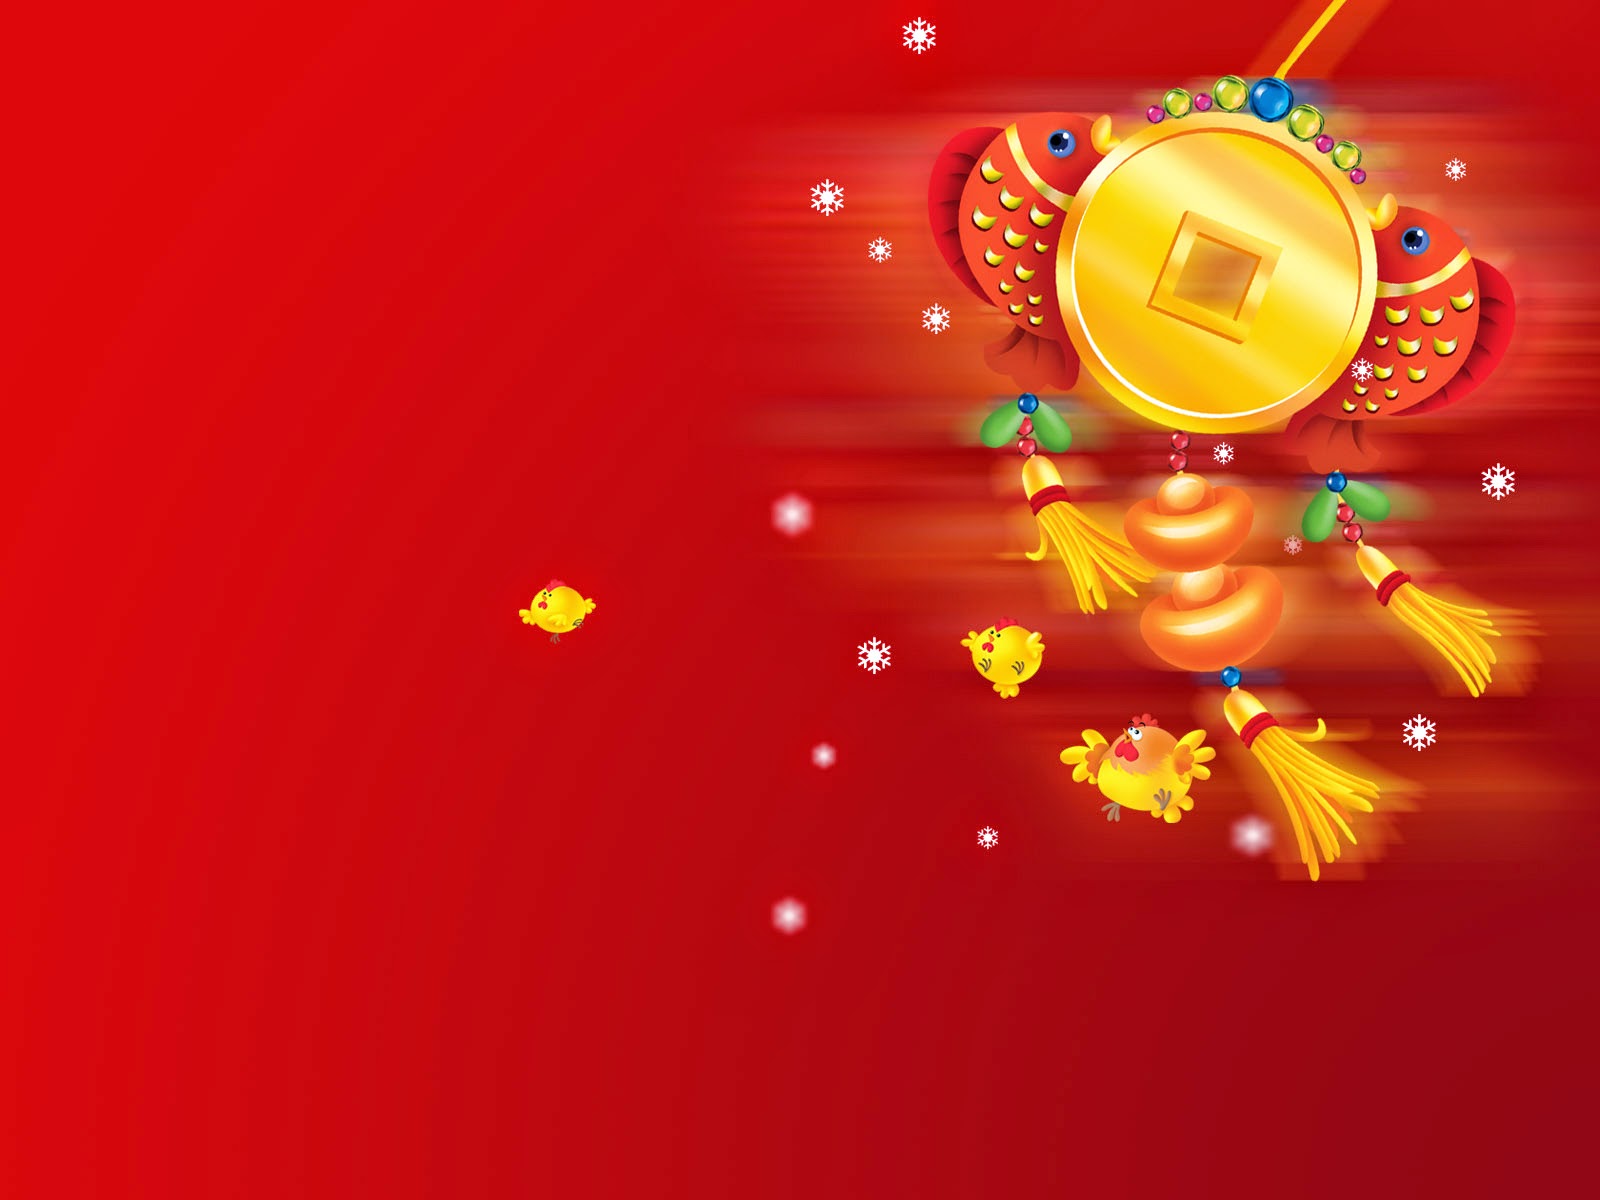 Image Gallery Lunar New Year Wallpaper